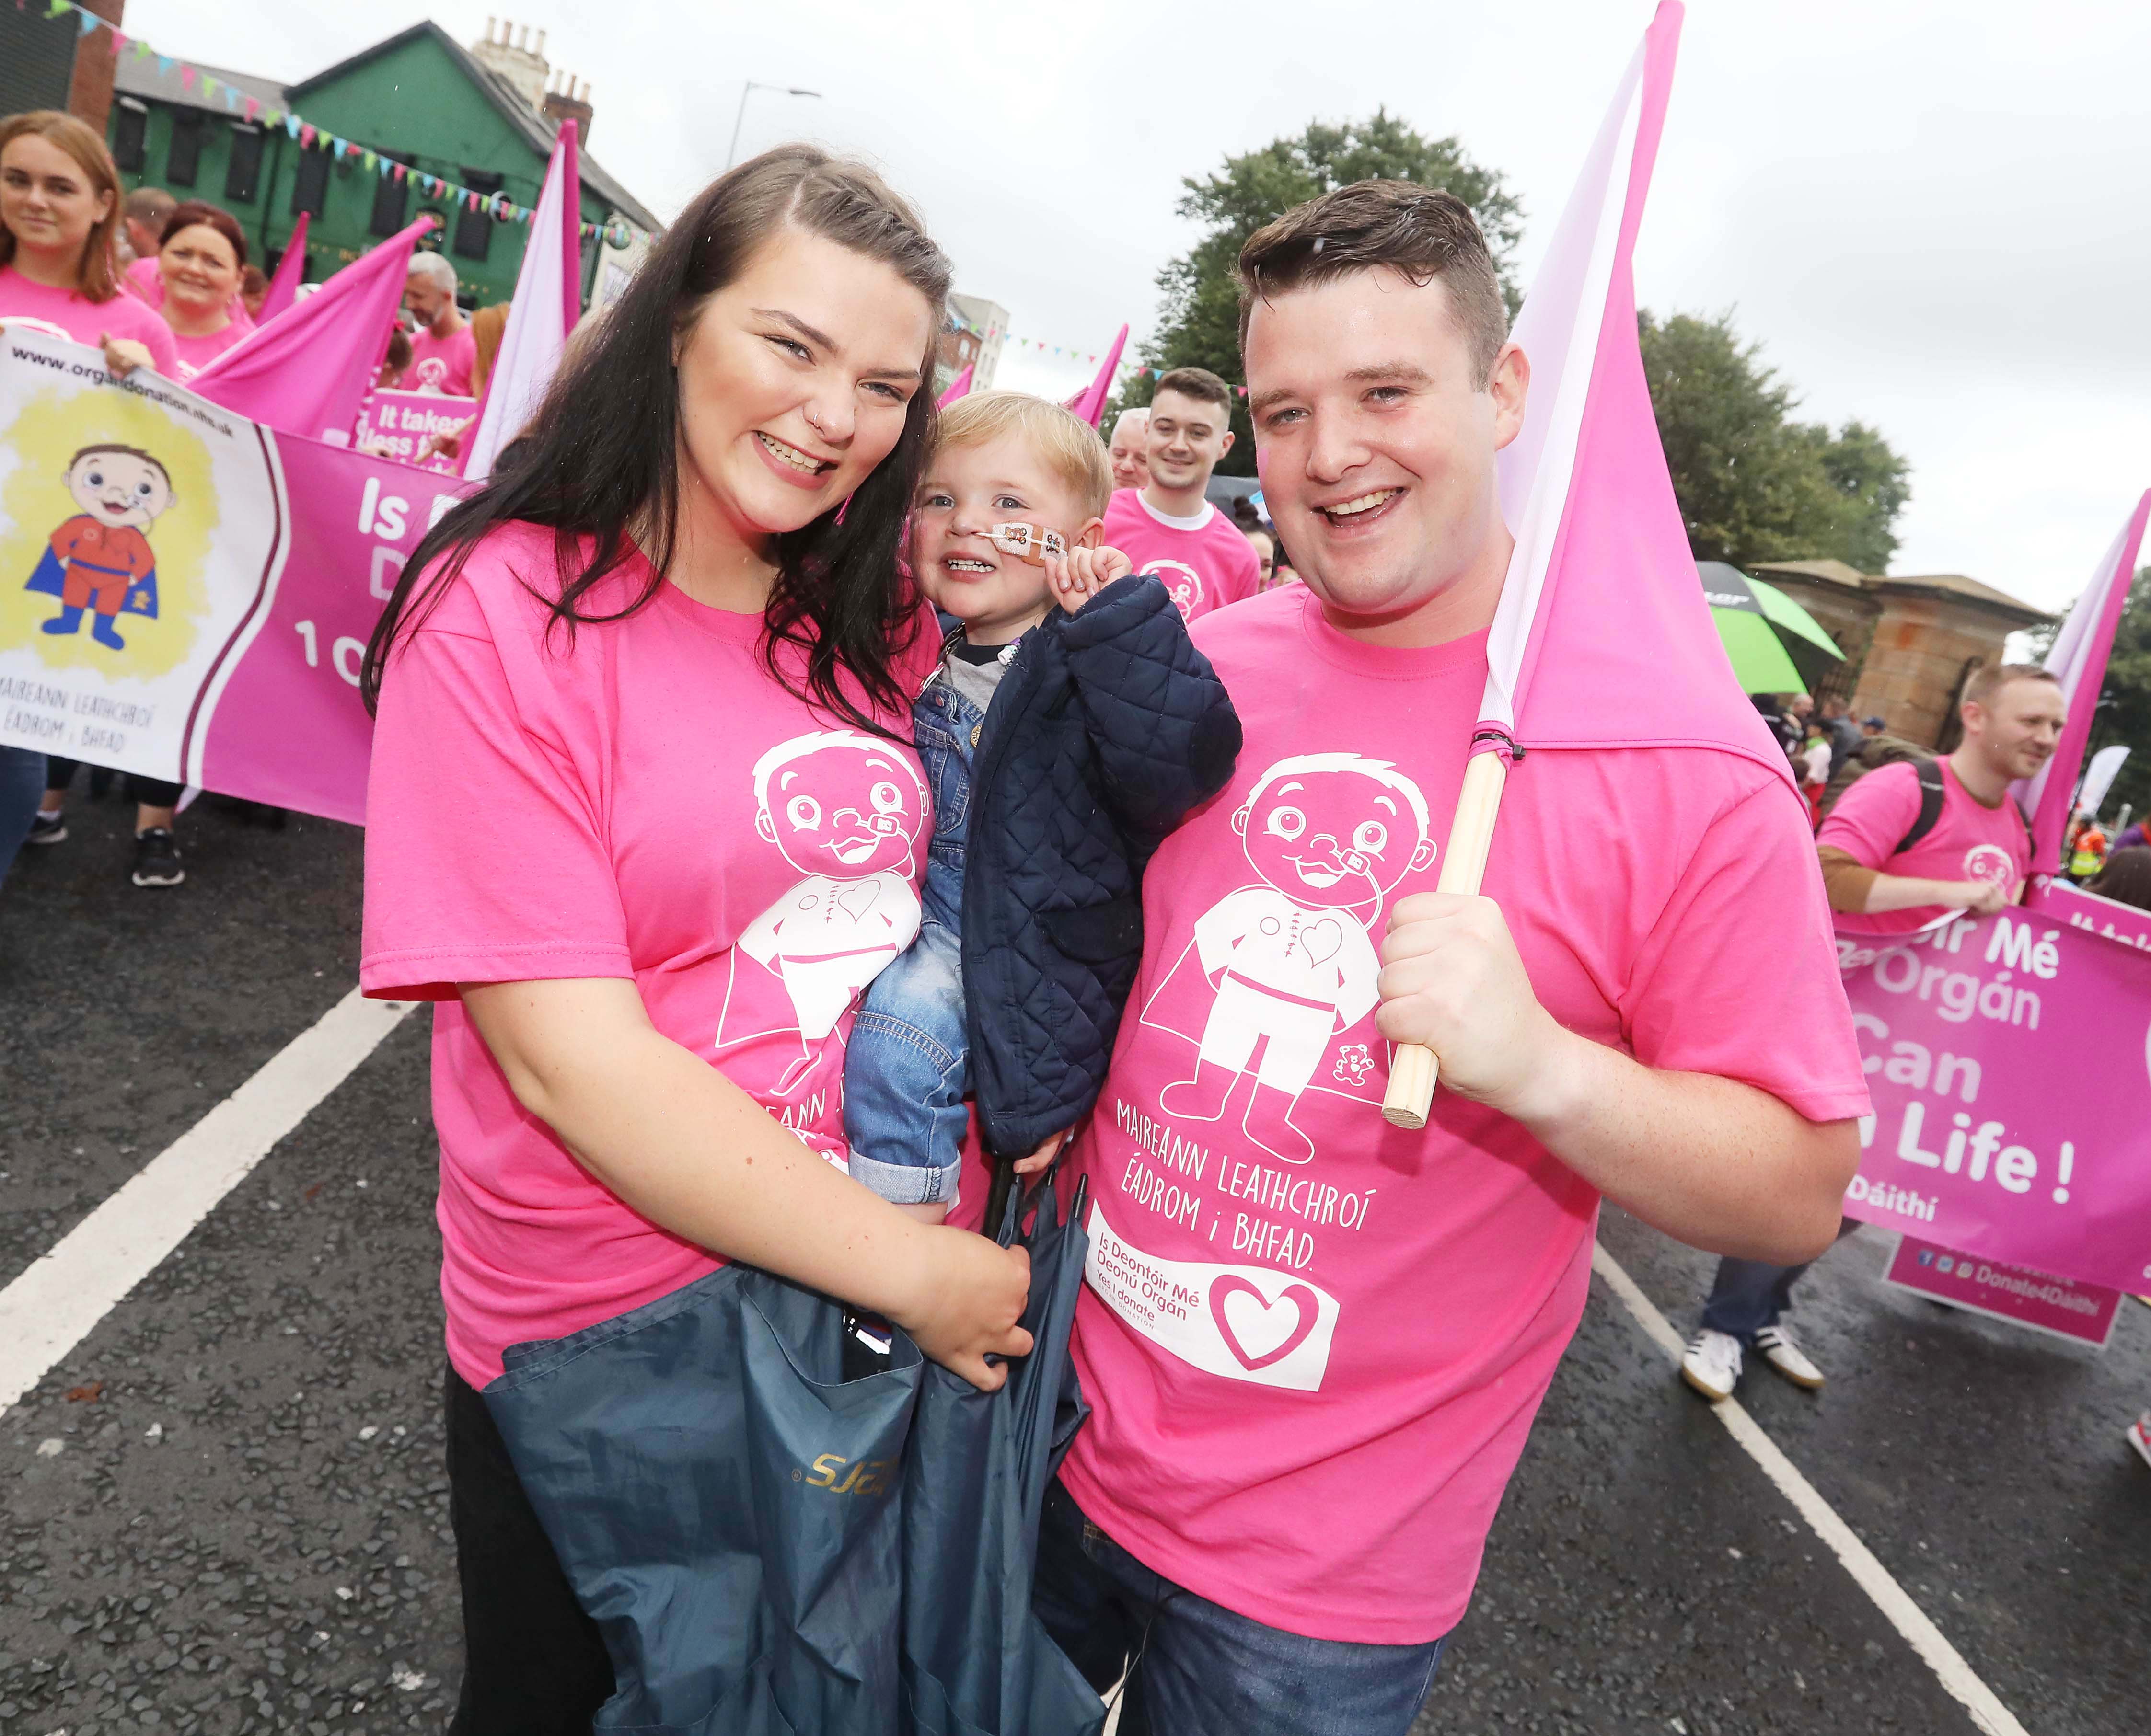 The Falls Road was awash with pink on Saturday for West Belfast toddler Dáithí Mac Gabhann and his parents Máirtín and Seph. The Whiterock two-year-old was grand carnival marshal for the annual Féile an Phobail parade which supported the family’s ‘Is Deontóir Mé/Yes I Donate’ campaign.